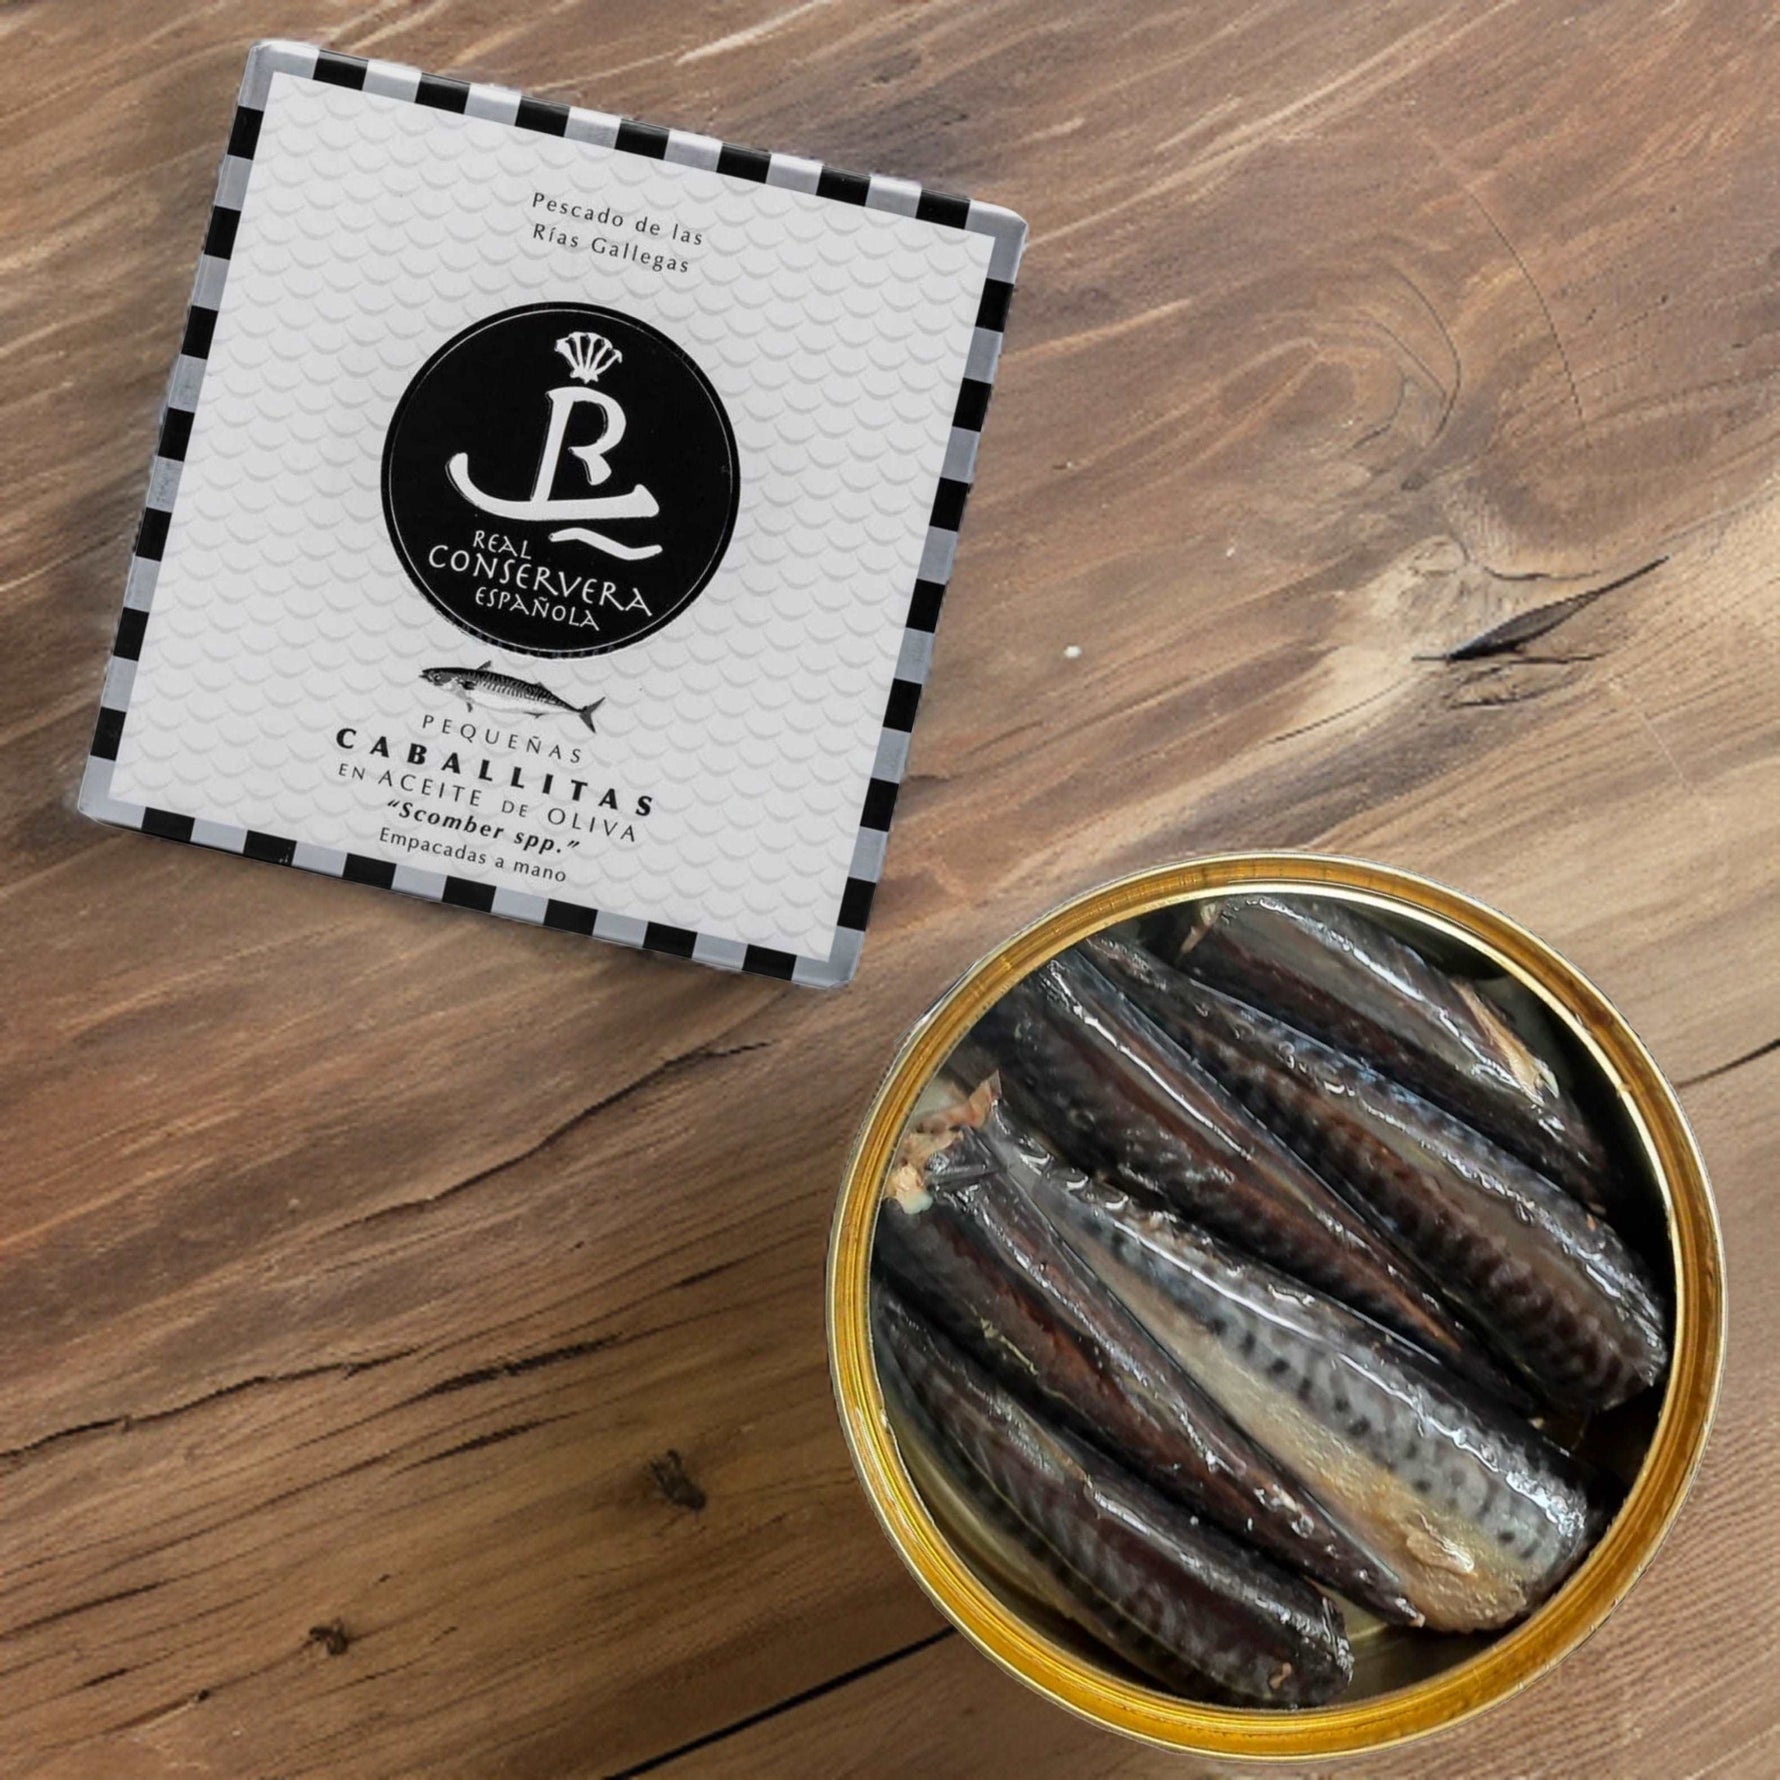 Small Mackerels in Olive Oil by Real Conservera Española